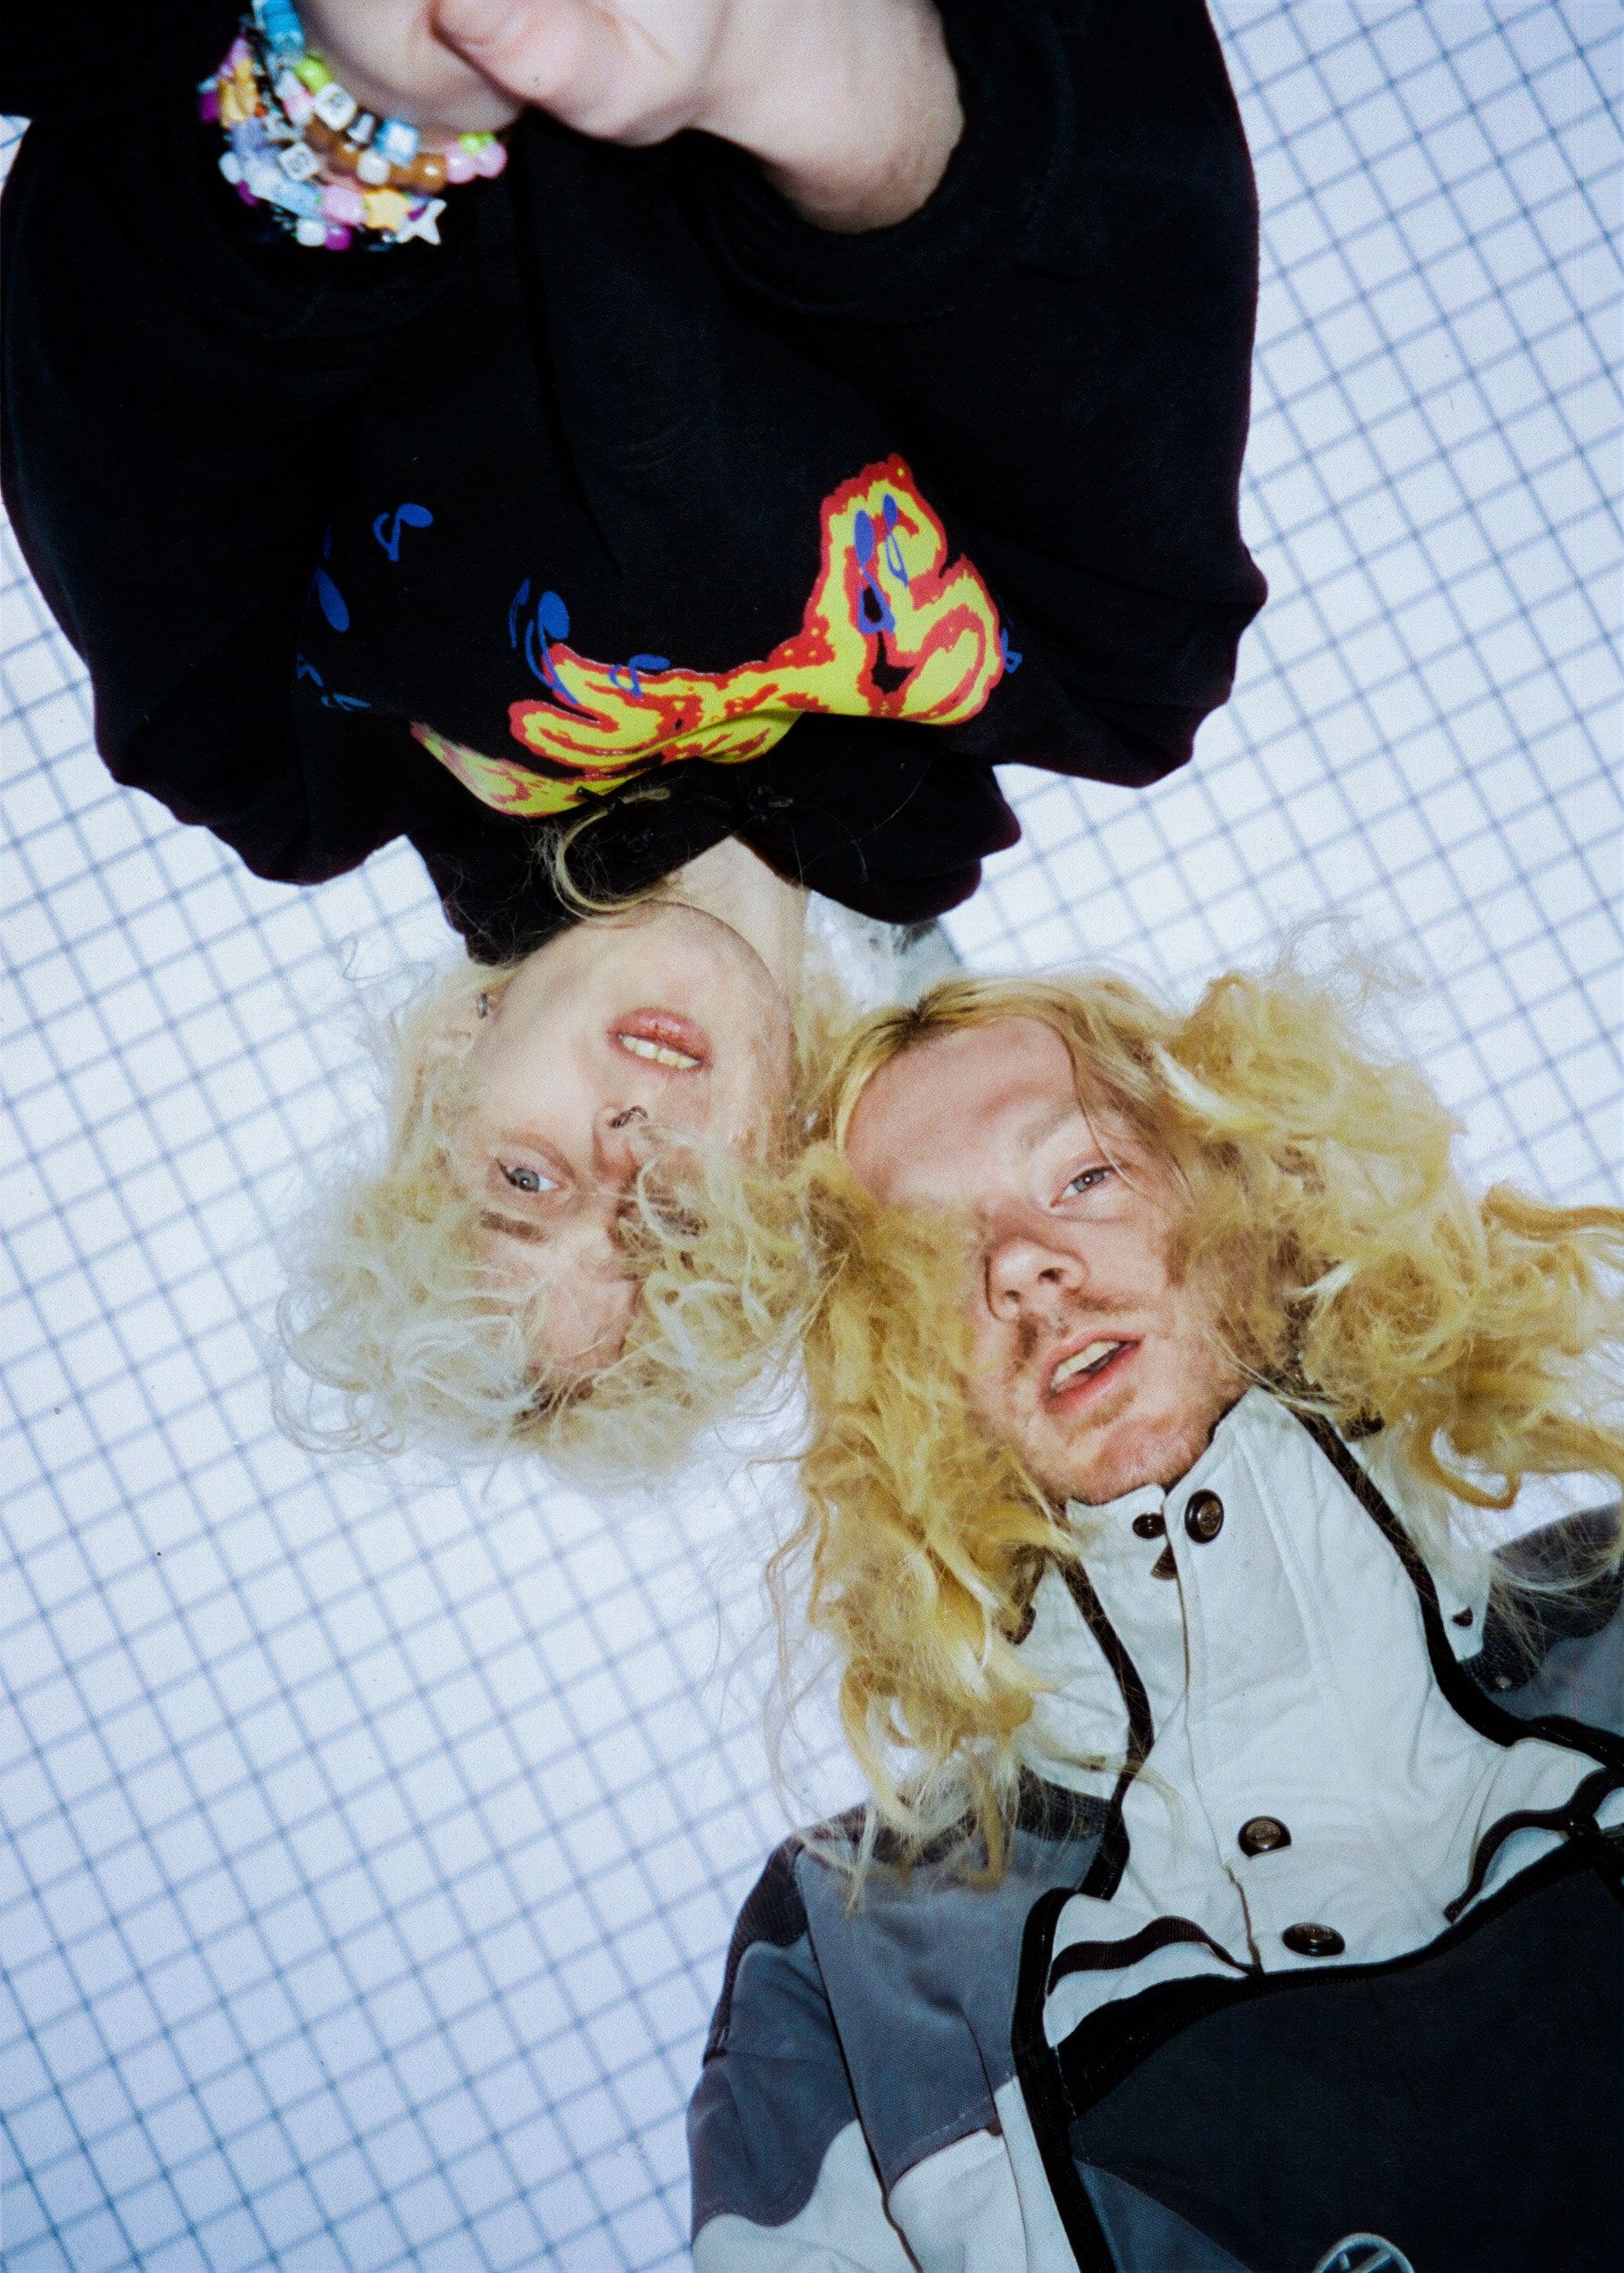 Meet 100 gecs, the Absurdist Pop Duo Inspired By Everything on the Internet. them